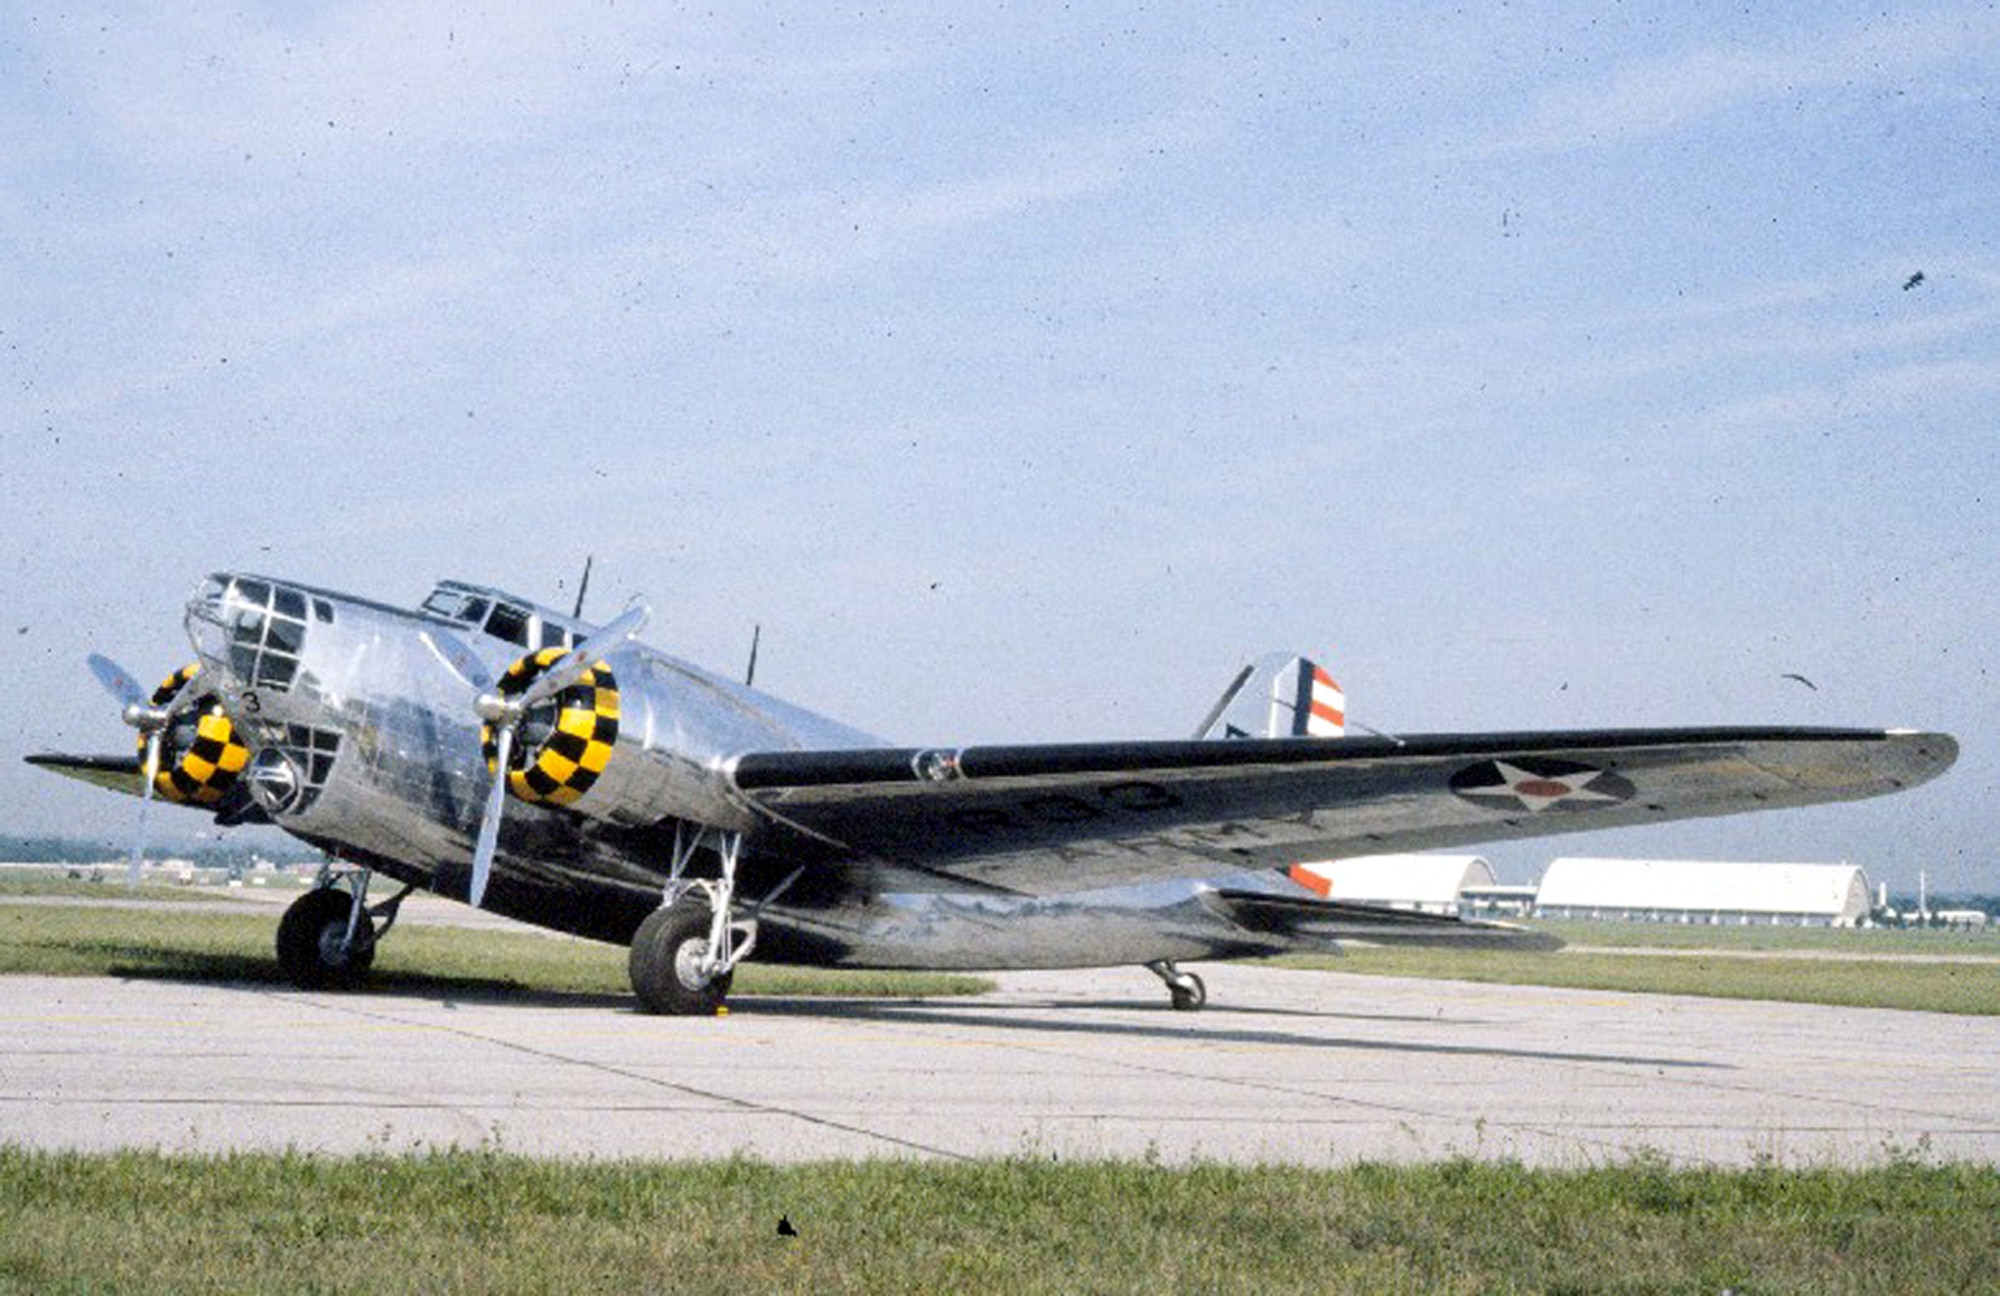 DAYTON, Ohio -- Douglas B-18 Bolo at the National Museum of the United States Air Force. (U.S. Air Force photo)